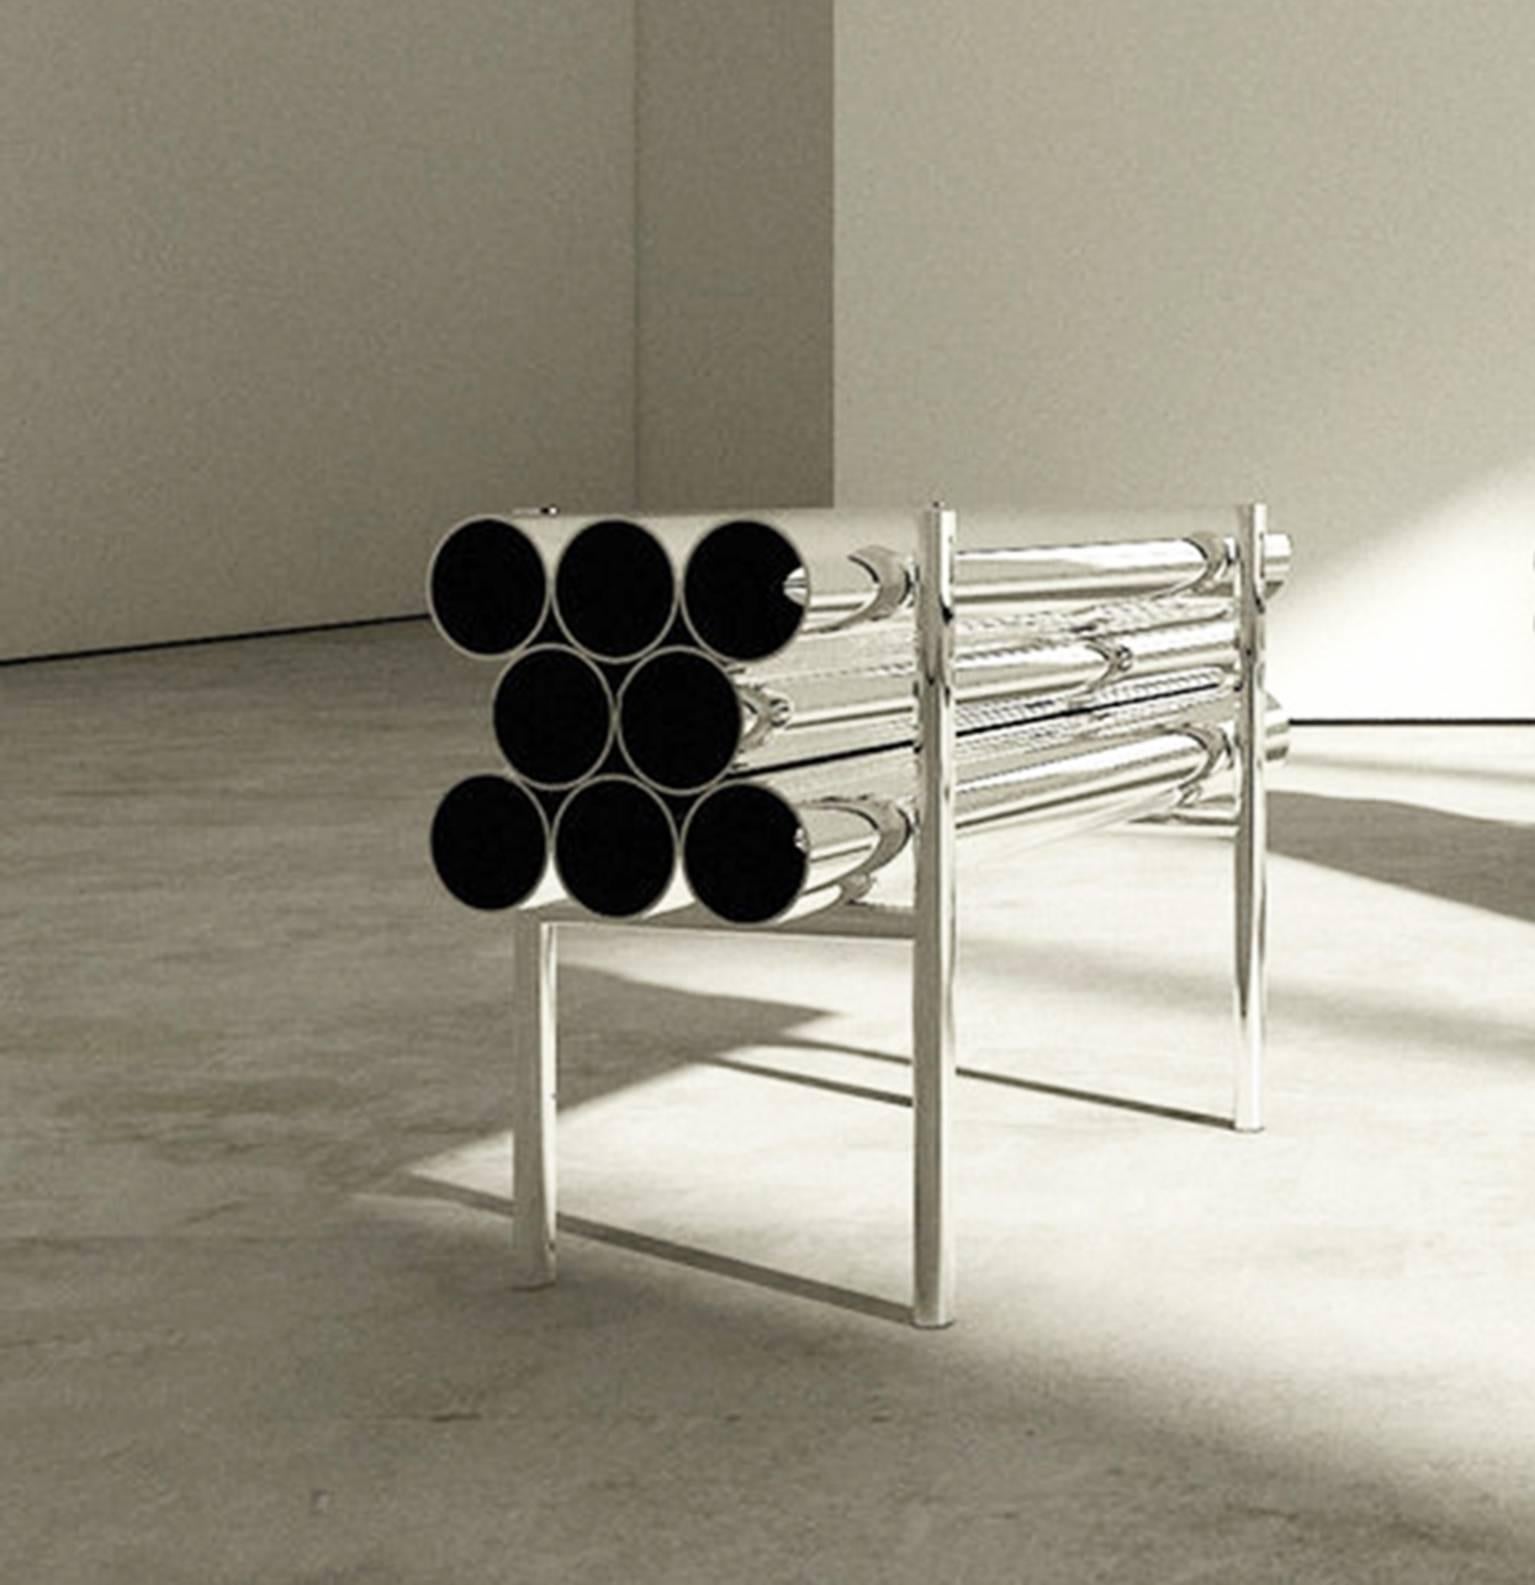 Simultaneously minimalistic and ostentatious, the short aluminium bench vaguely resembles stacks of hardware you might find at a construction site. Polished and refined, it’s the perfect statement piece that acclimates to any space, as the aluminium